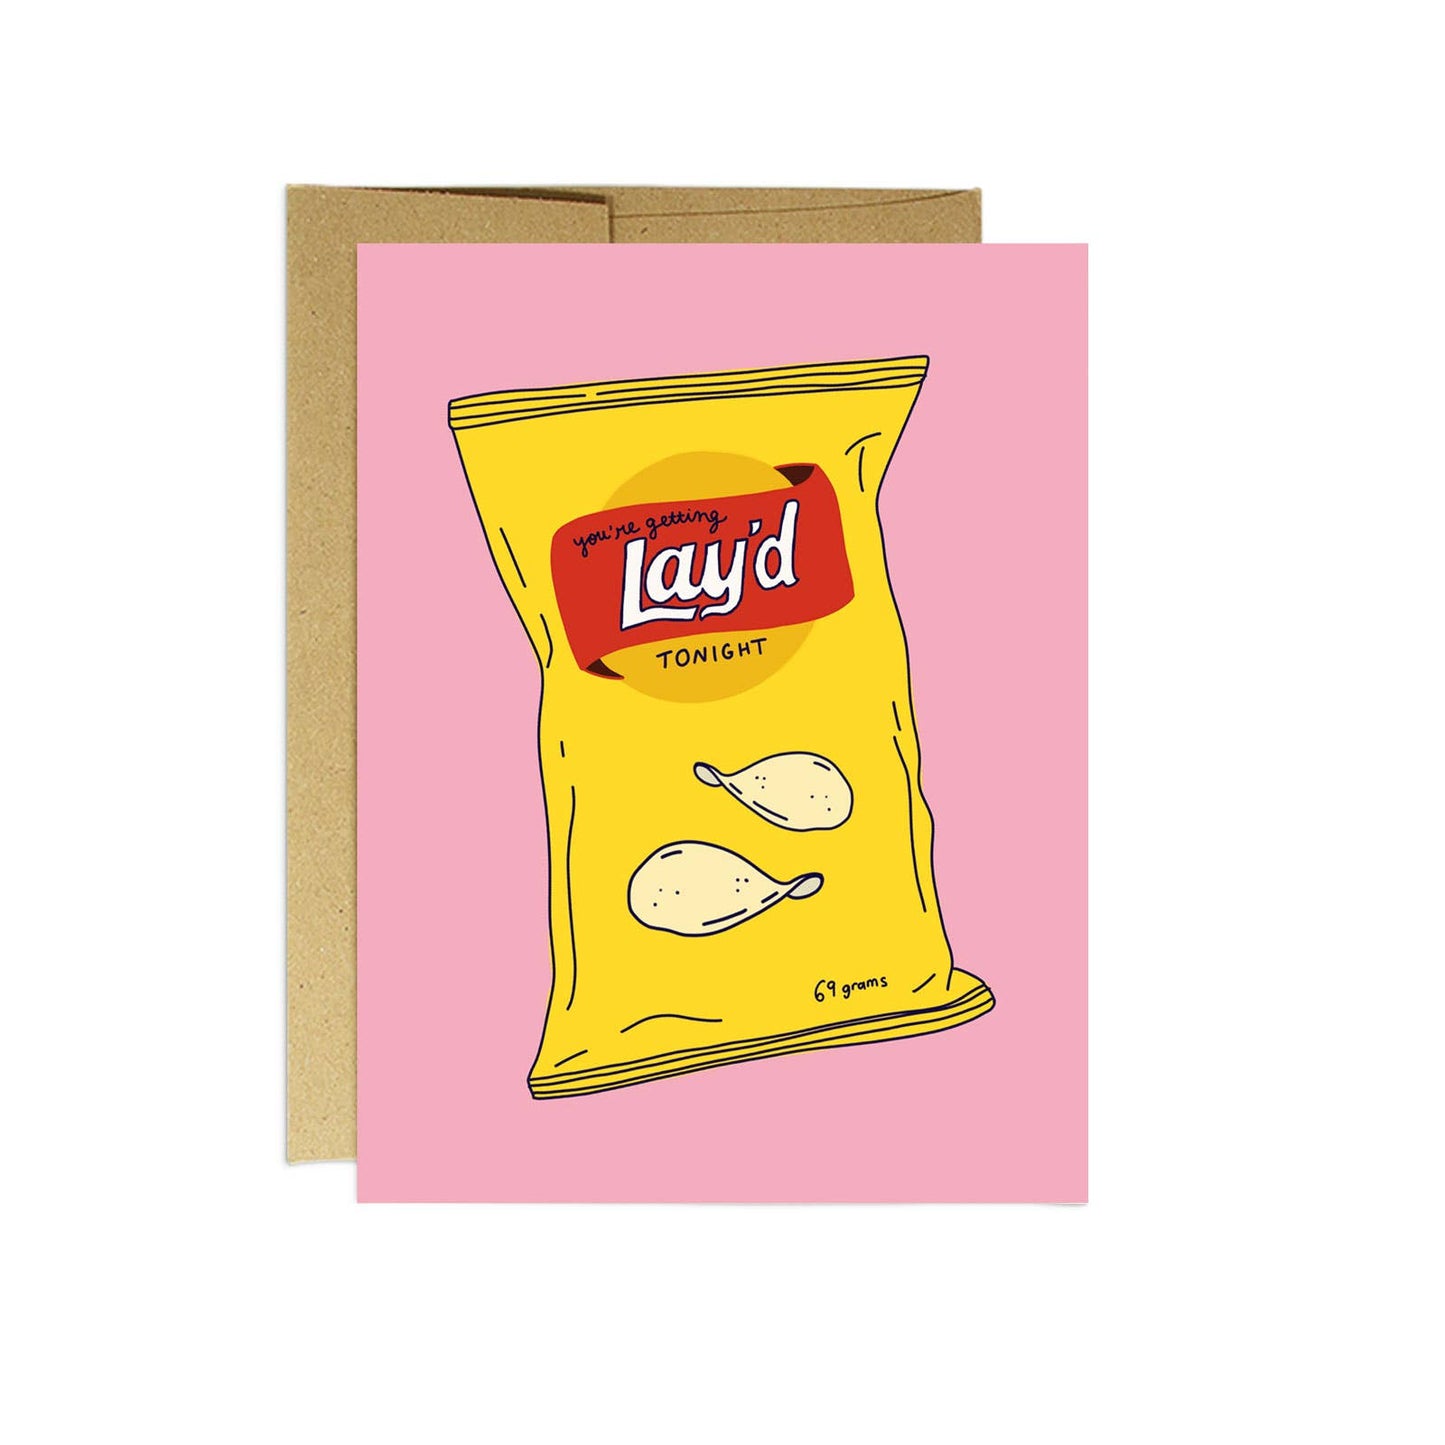 Party Mountain Paper co. - Lay'd Tonight | Love Card